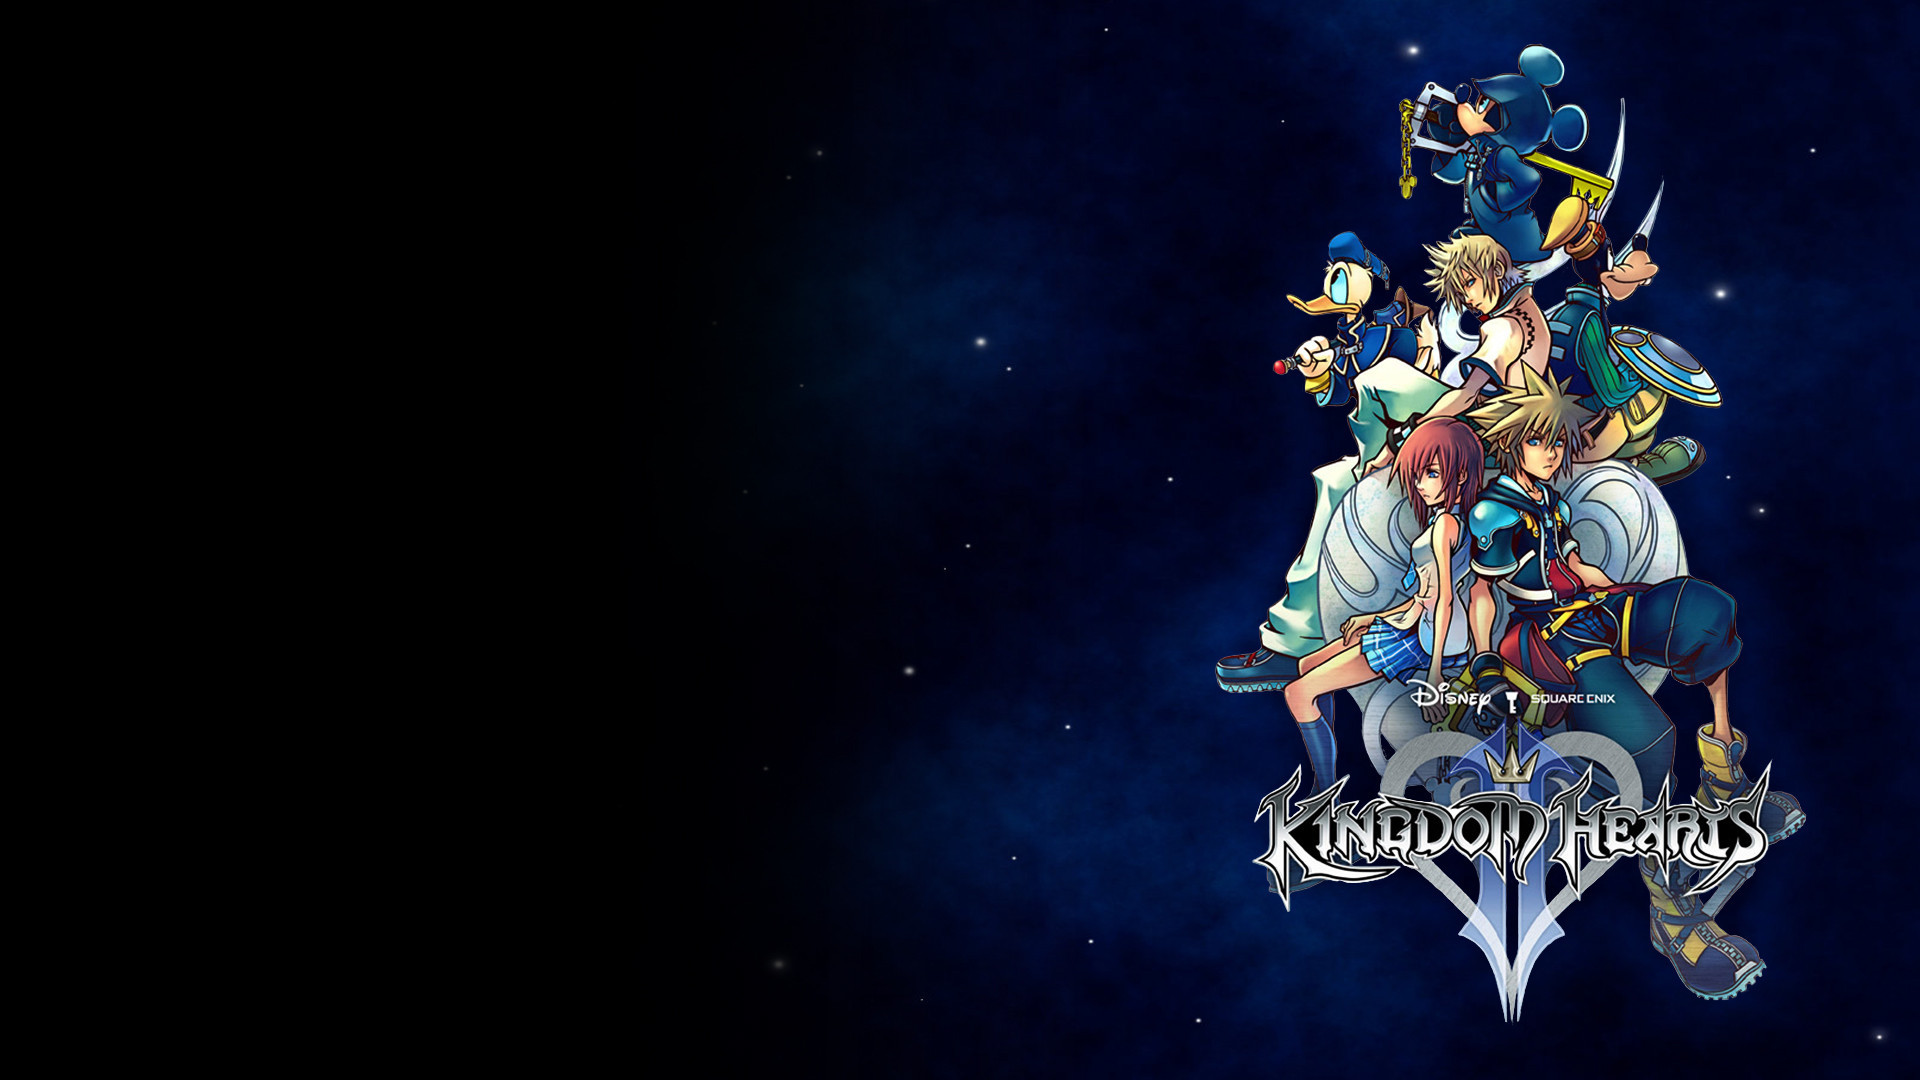 1920x1080 Here is a collection of Kingdom Hearts wallpapers that I compiled. Feel  free to use them as your own wallpapers.